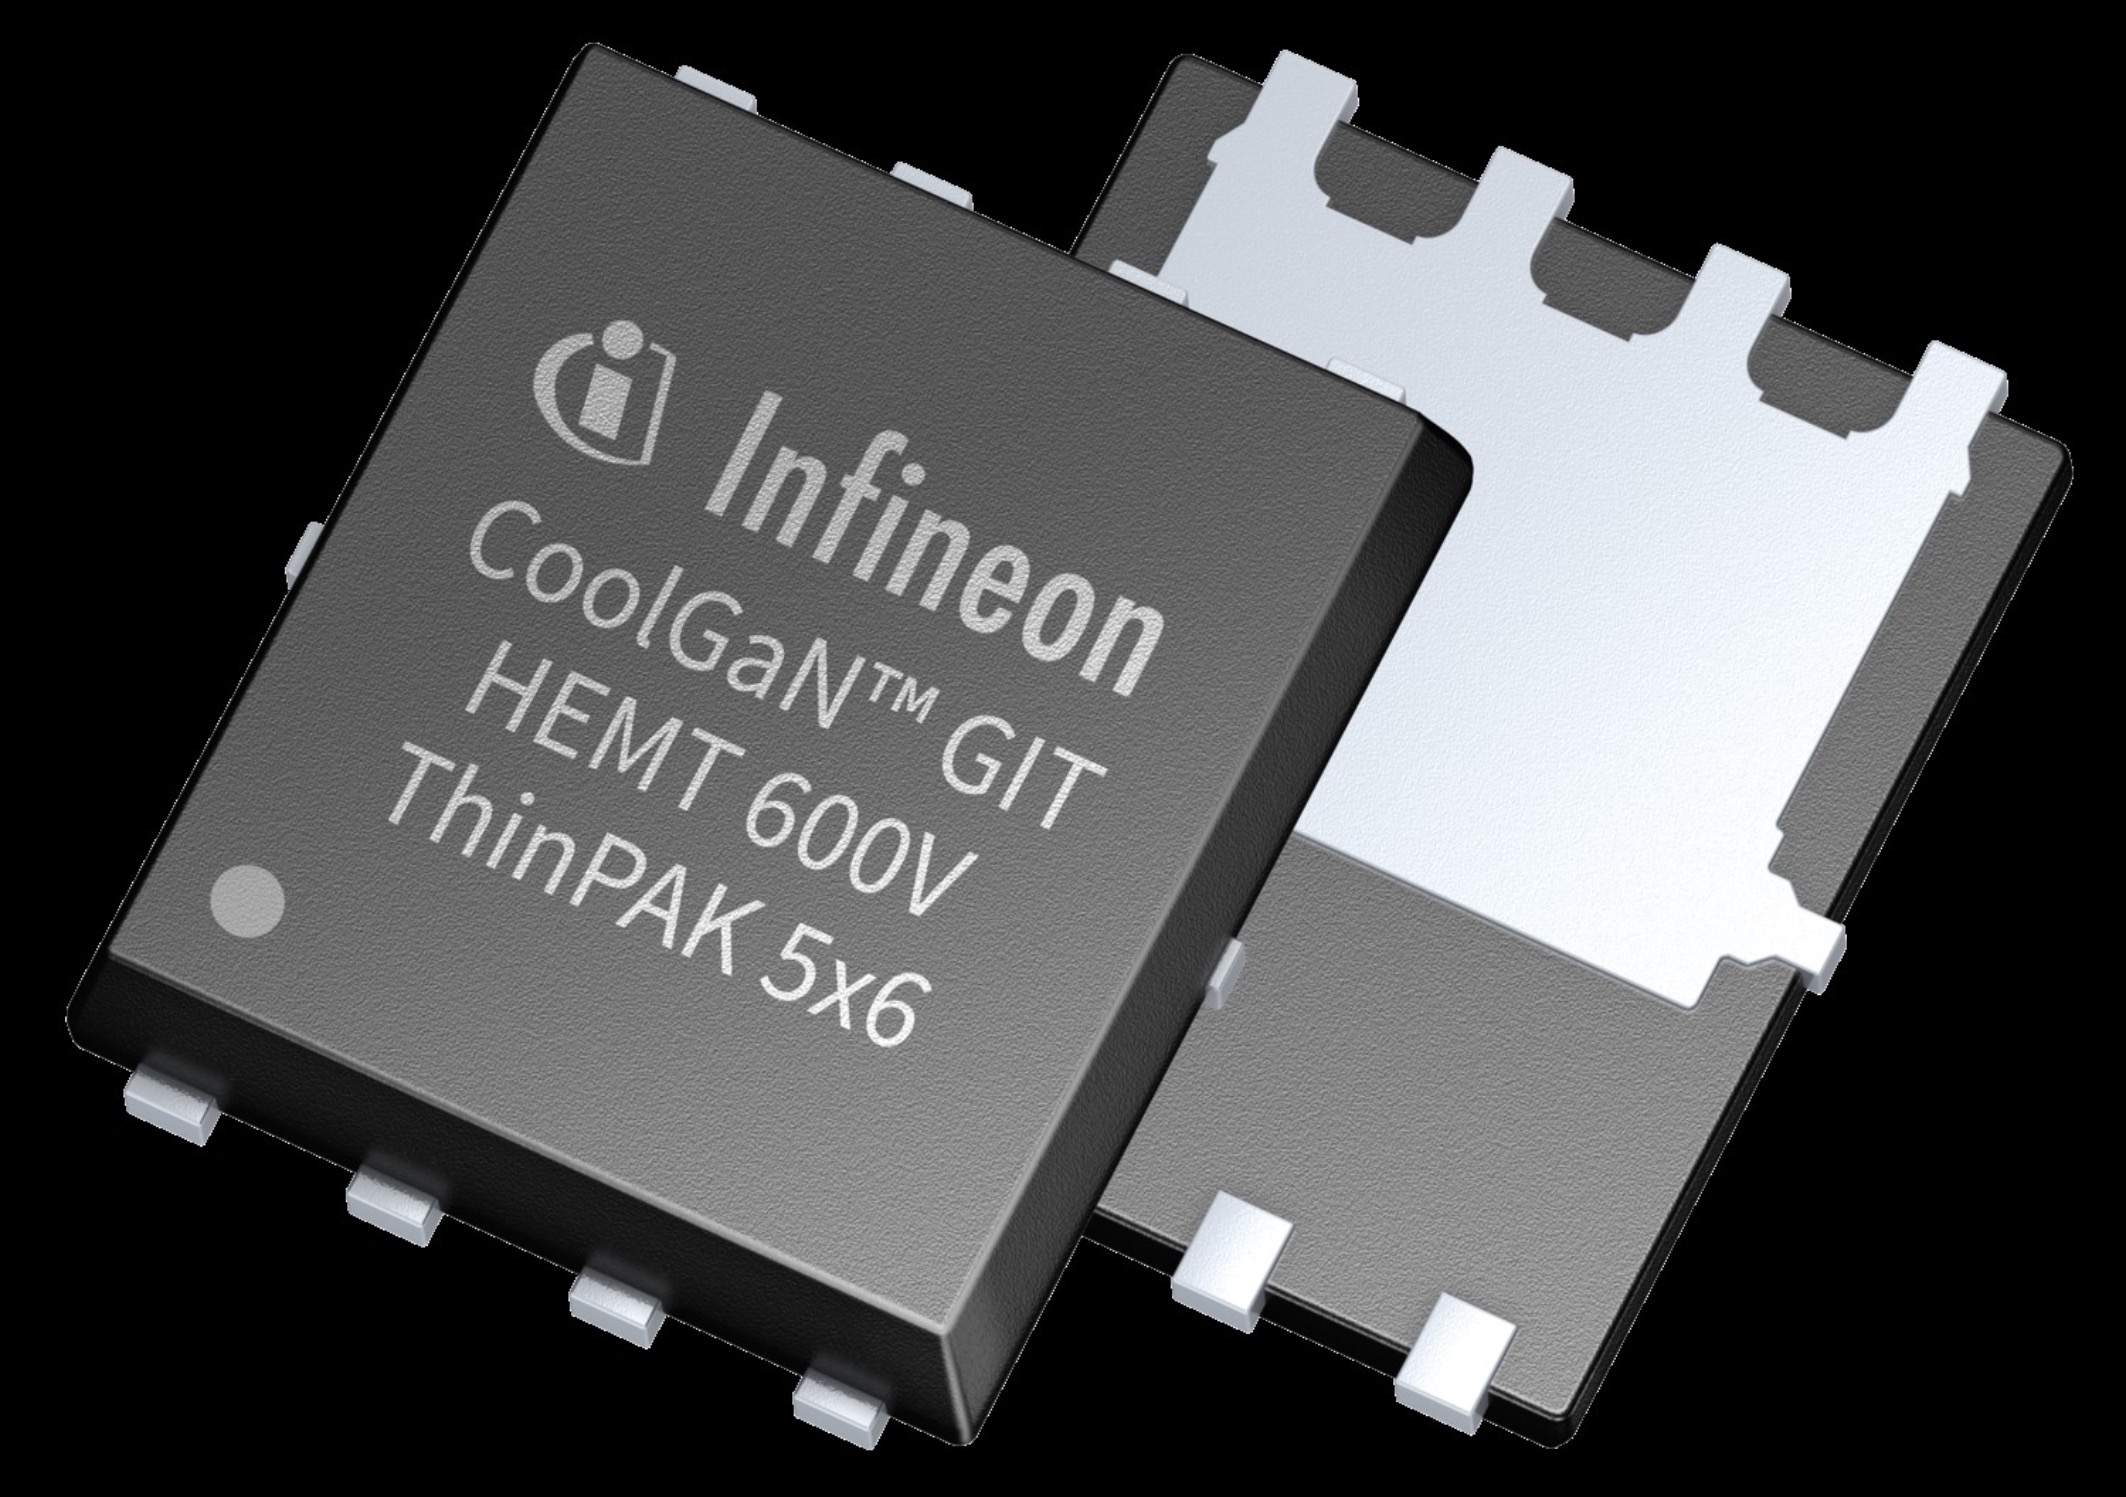 Infineon Launches CoolGaN 600 V GIT HEMT Portfolio, Delivering Exceptional Performance and Quality, in Full Supply